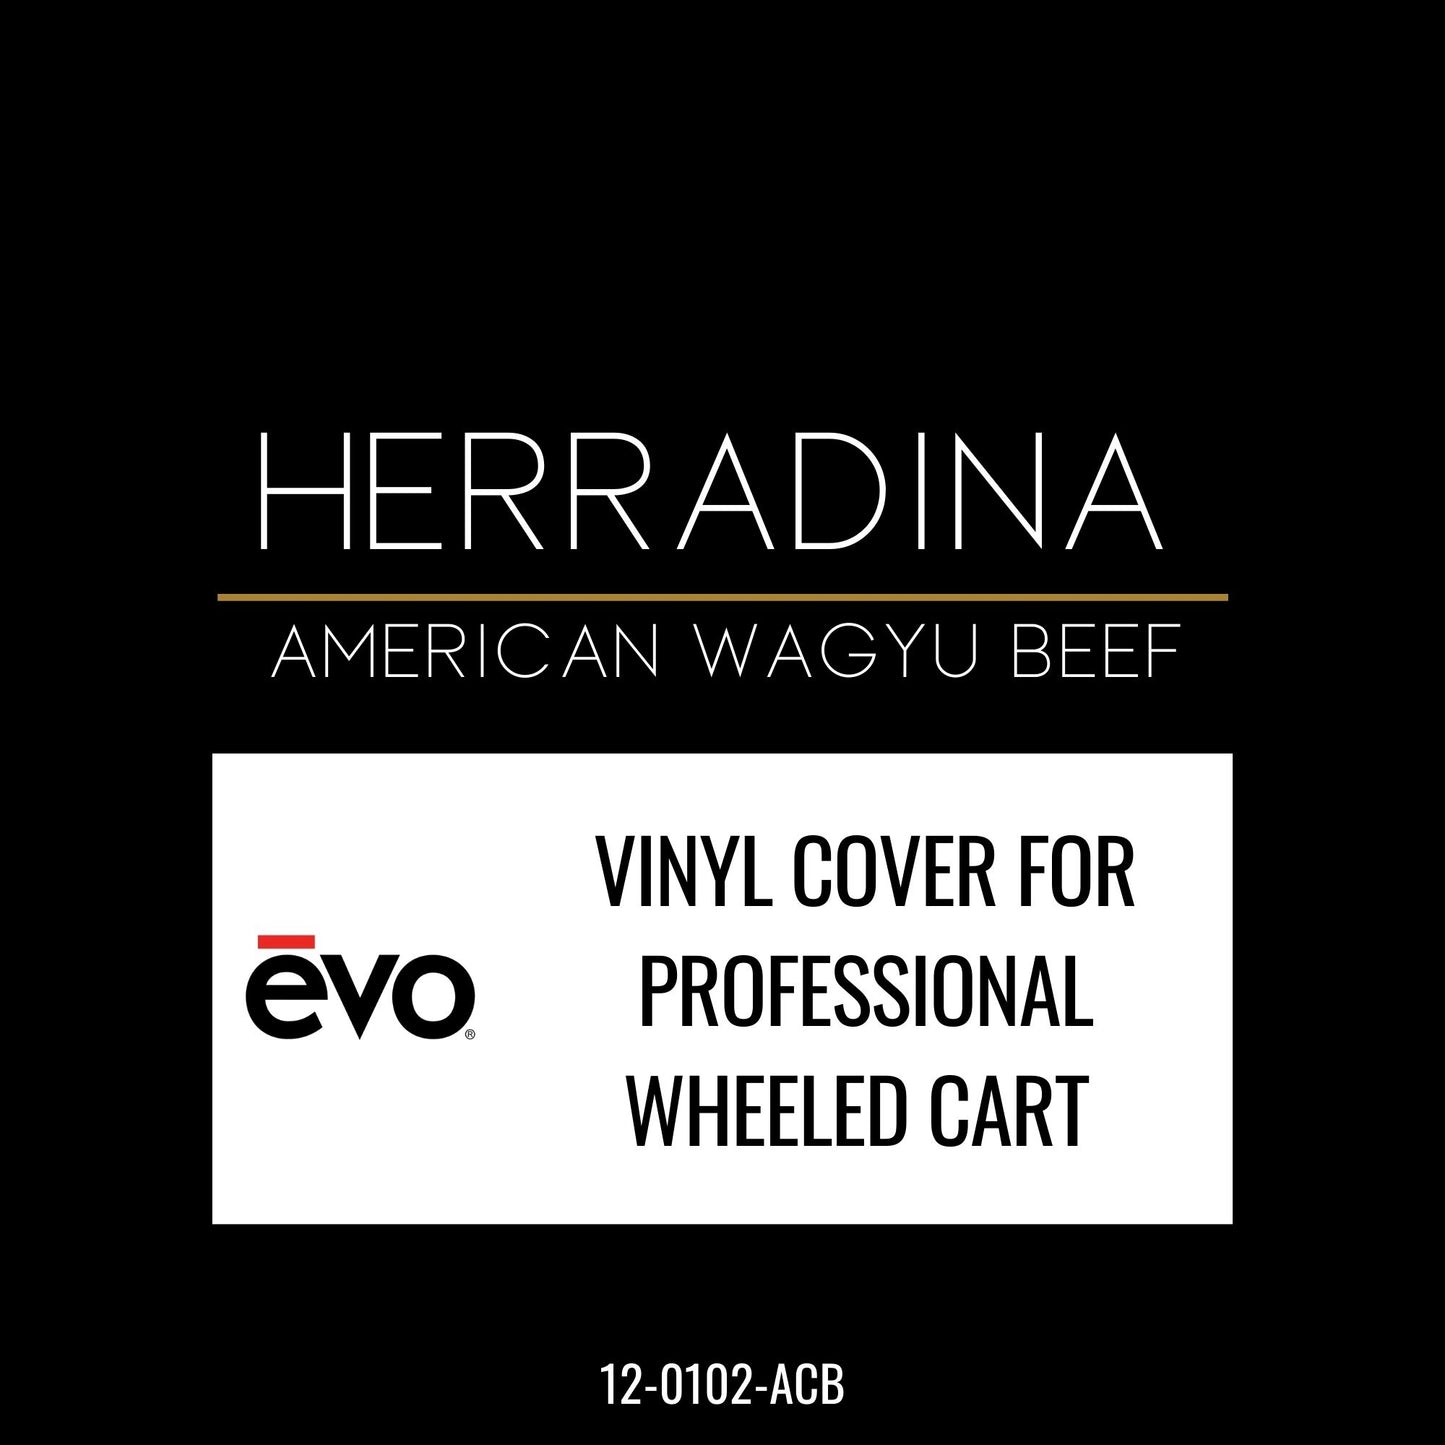 EVO VINYL COVER FOR PROFESSIONAL WHEELED CART